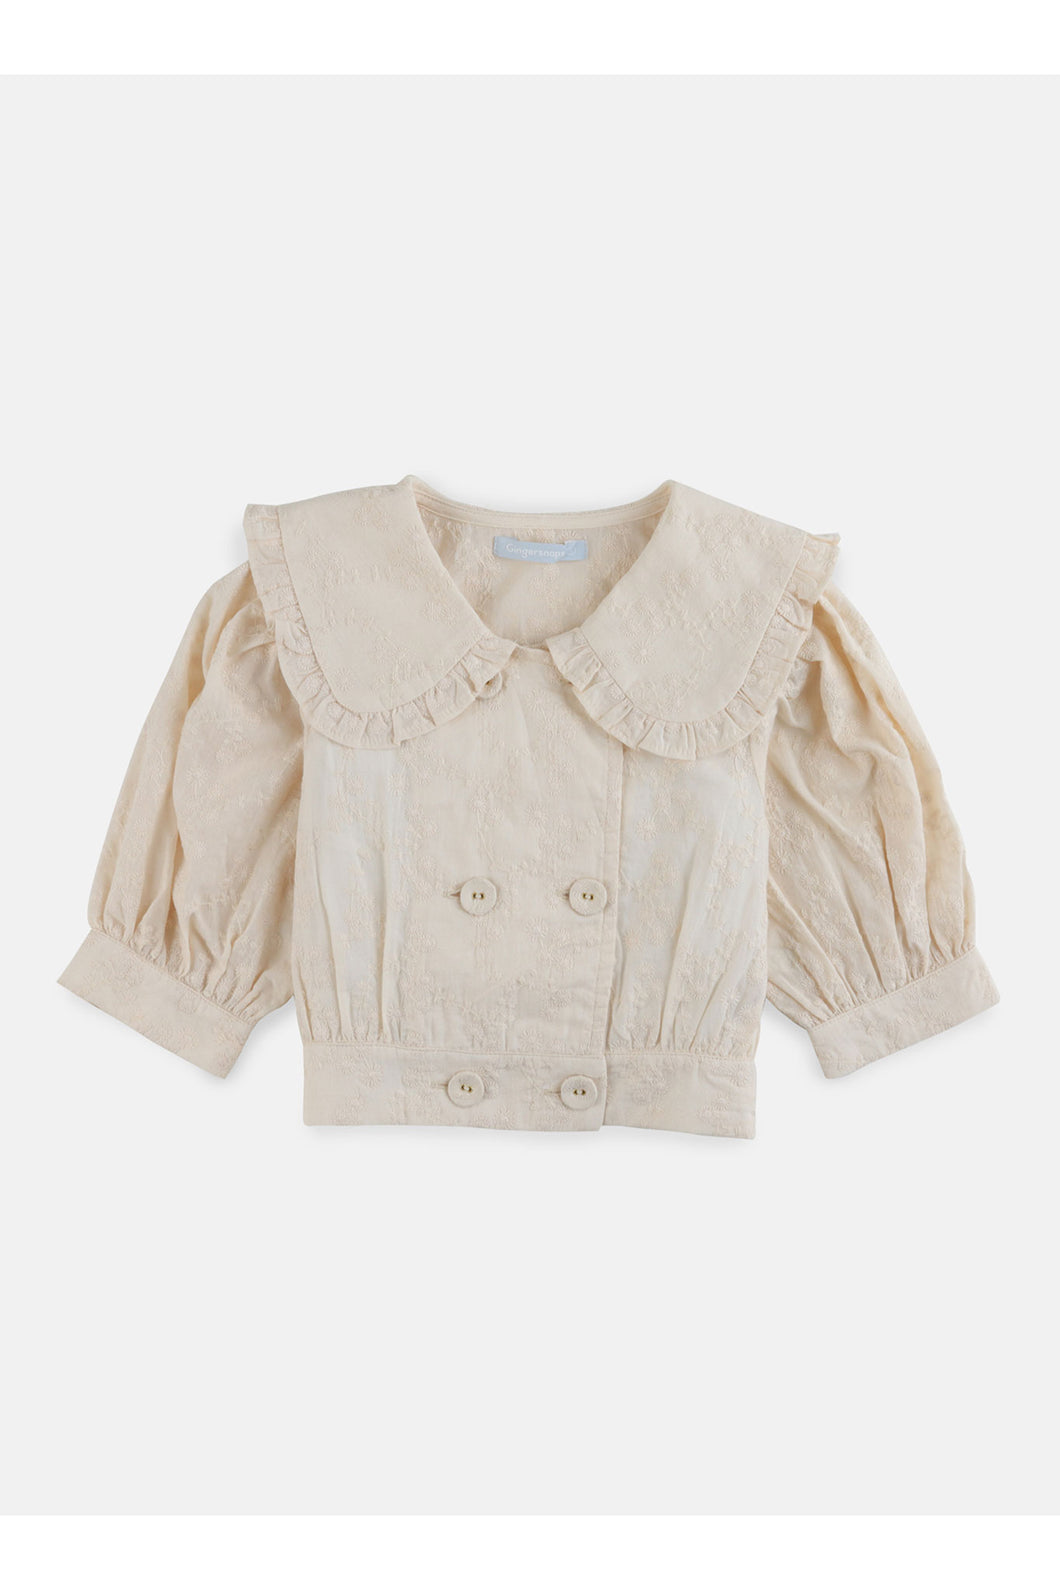 Gingersnaps Embroidered Top with Peter Pan Collar